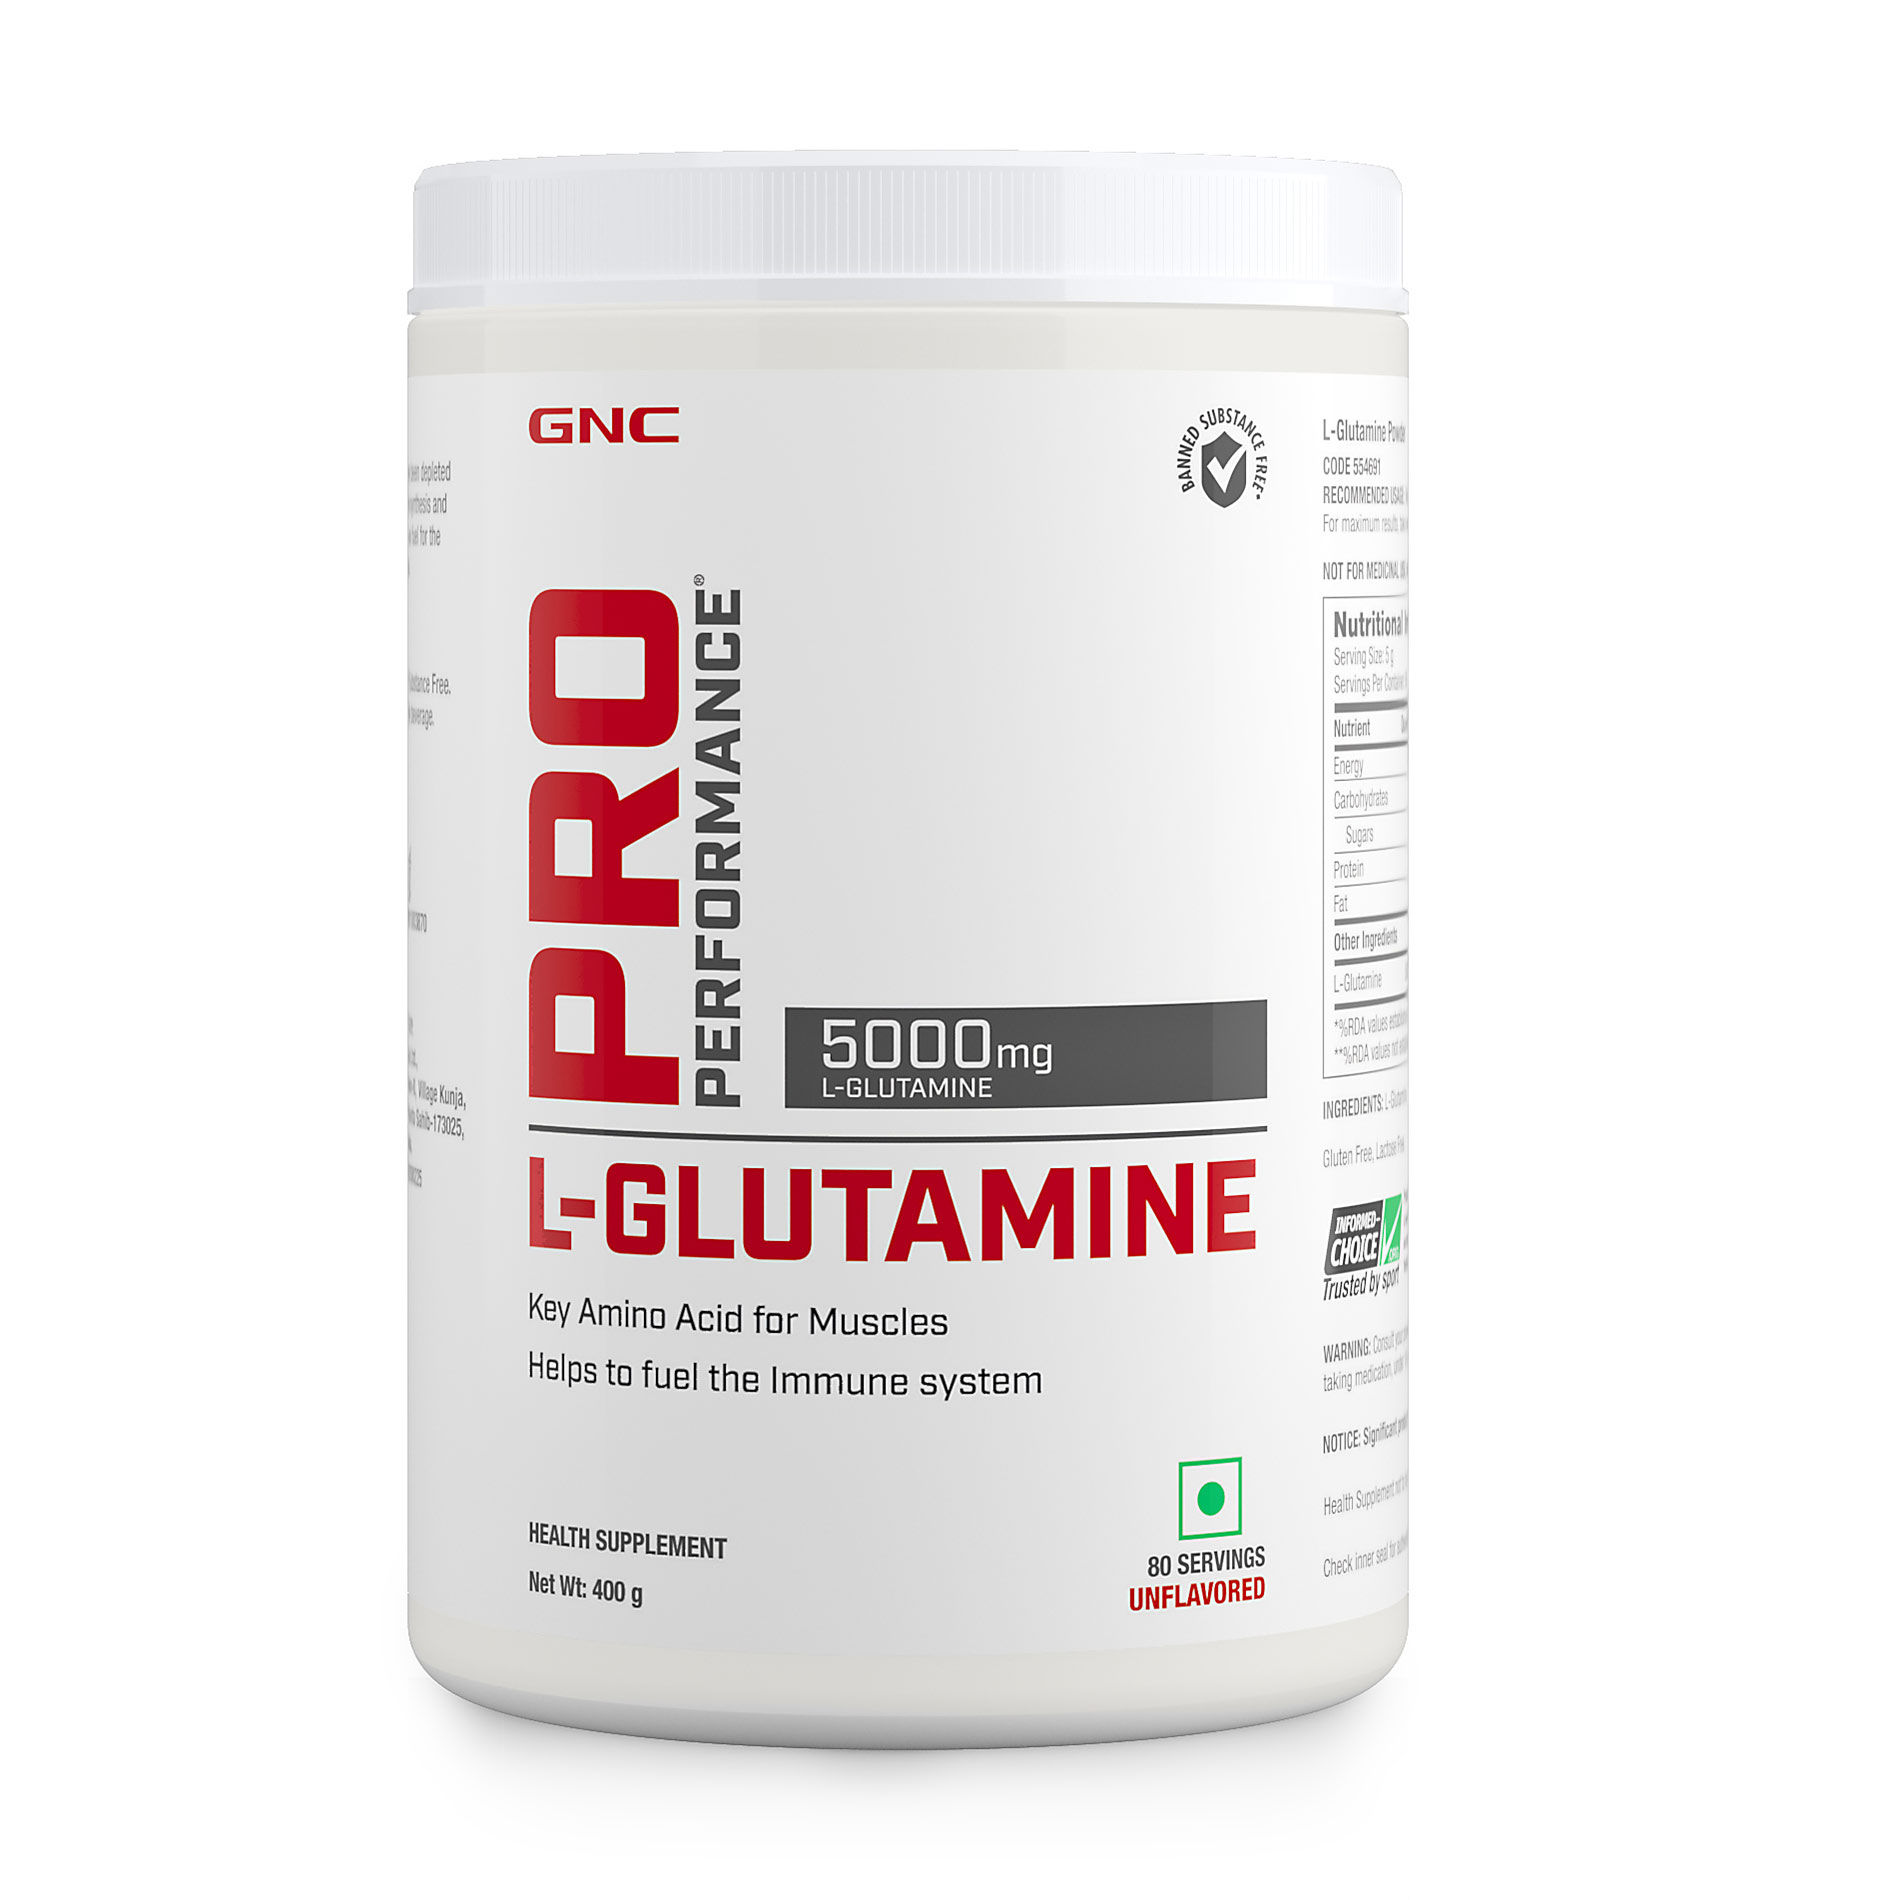 GNC Pro Performance L-Glutamine Powder 5000 mg - 80 Servings - 0.88 lbs (Unflavored)